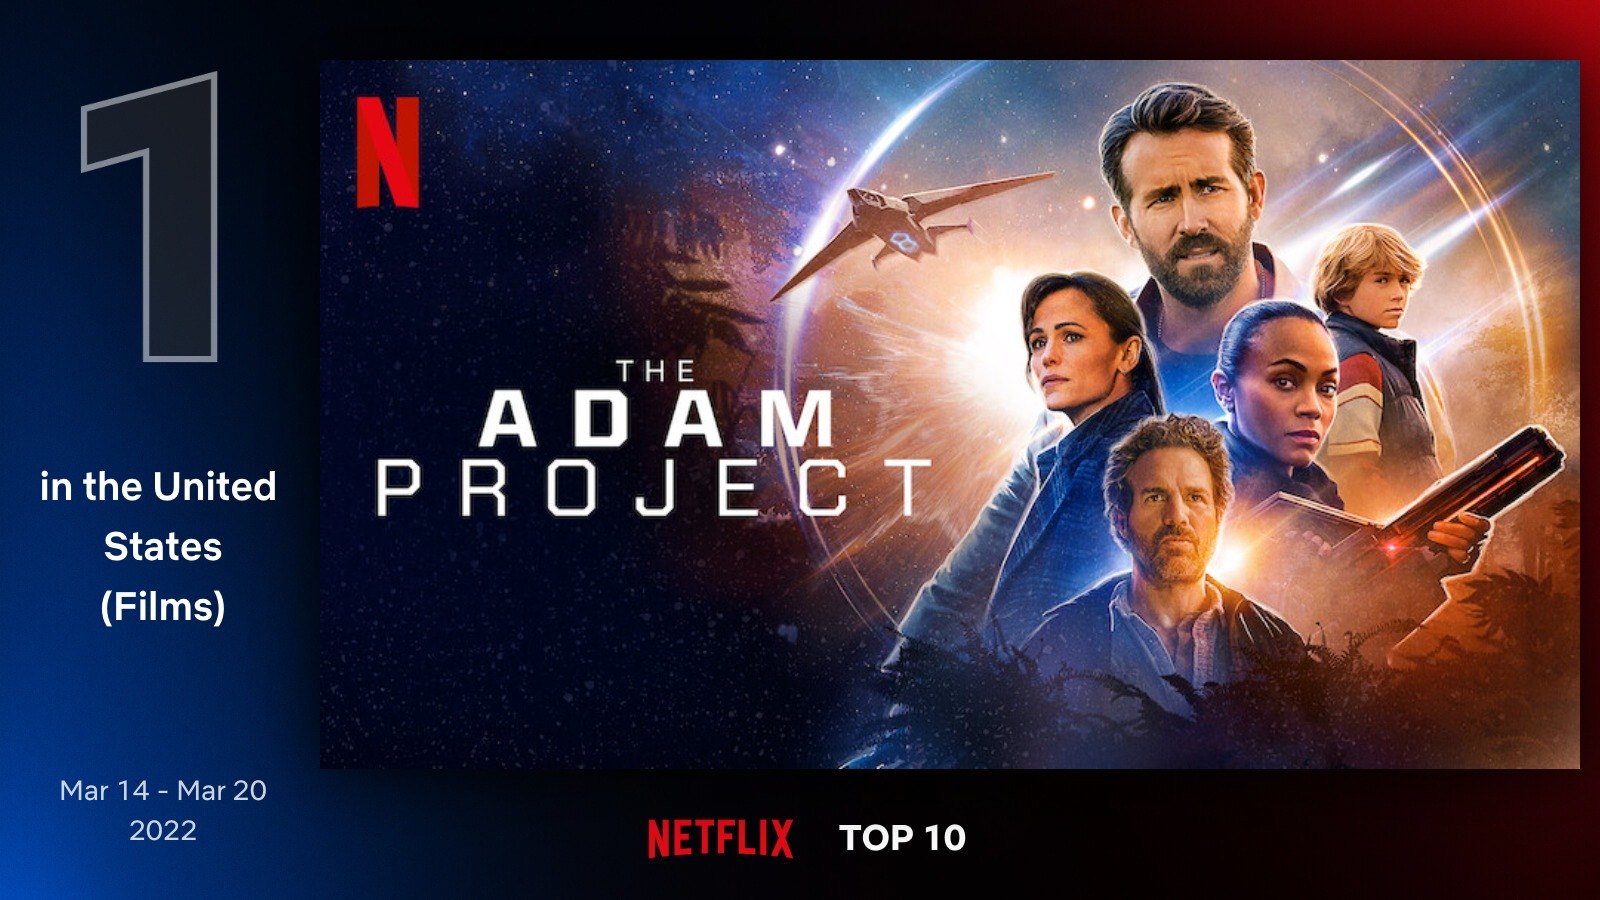 ‘The Adam Project’ Was The Top Film of the Week on Netflix